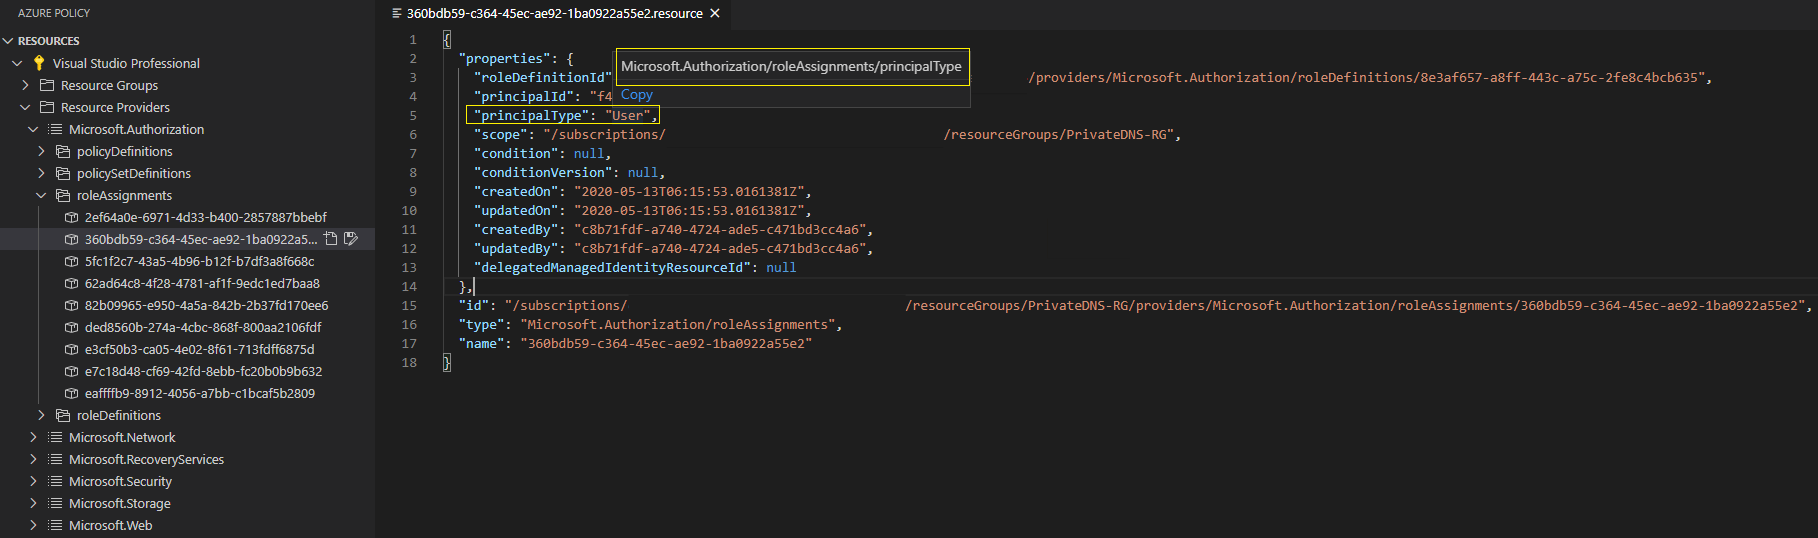 azure policy extension roleassignments principaltype